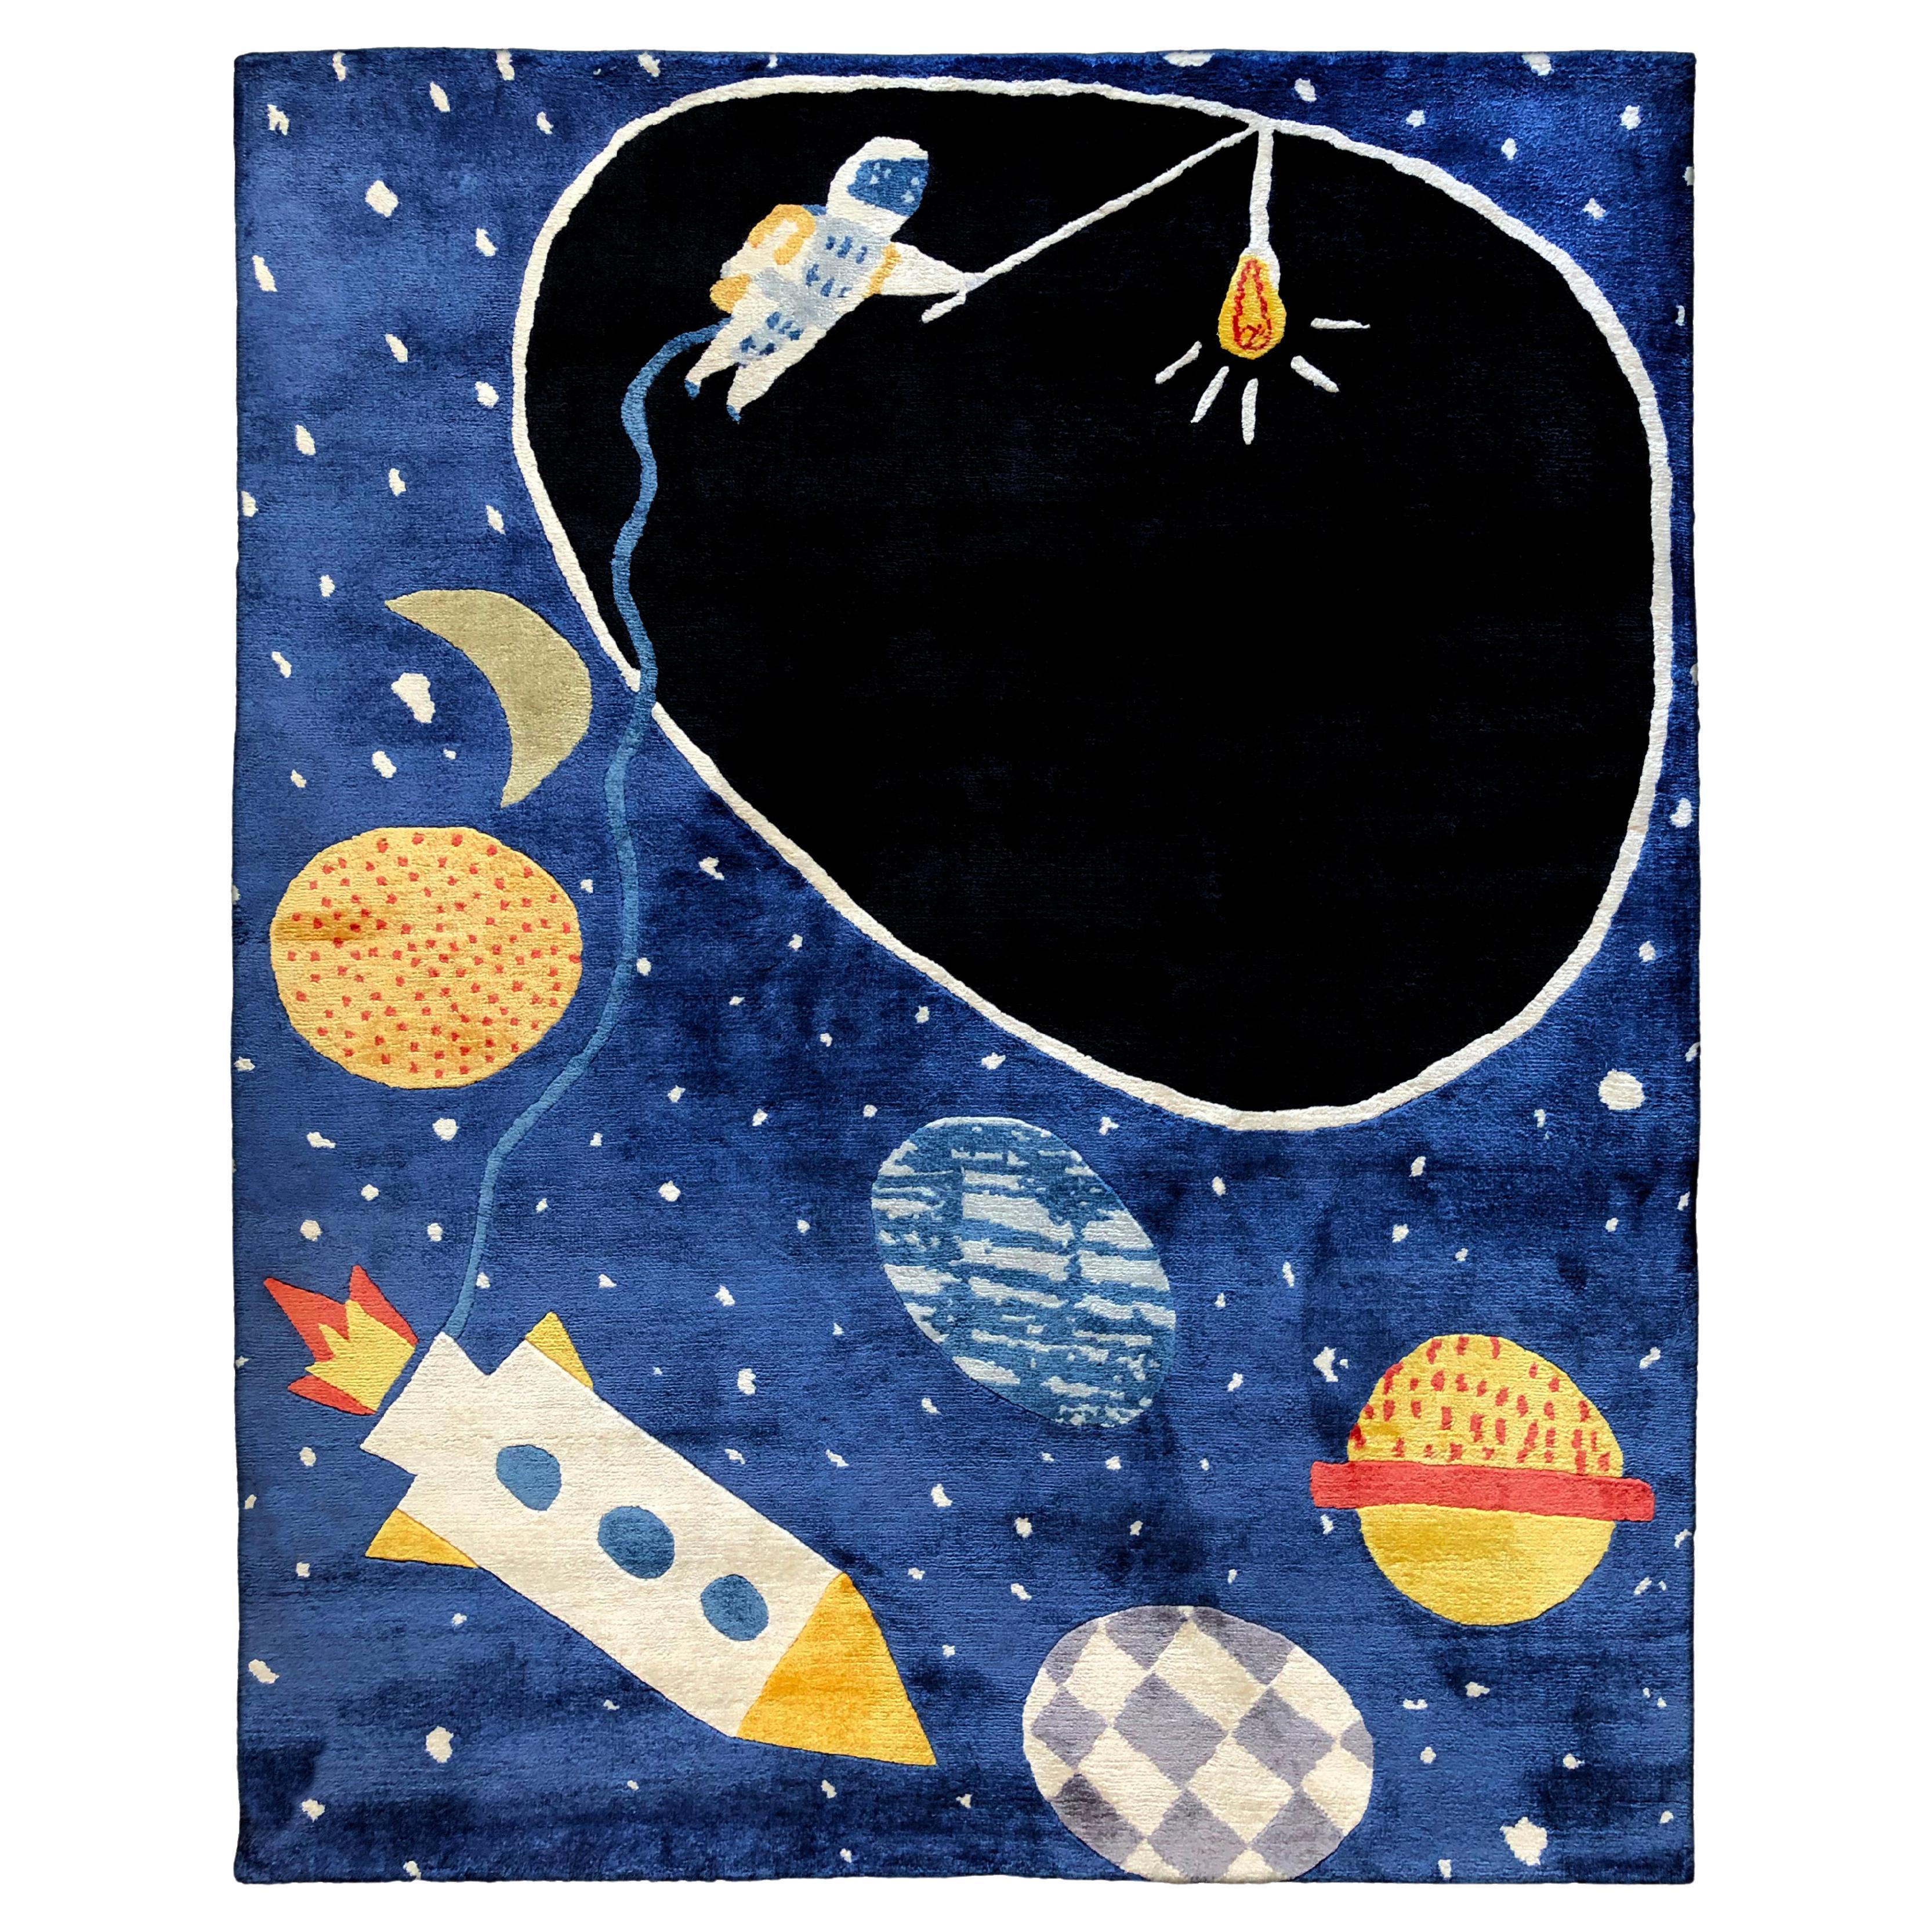 Space Ace Rug by Daria Solak, Hand Knotted, 100% New Zealand Wool Size 100x125cm For Sale